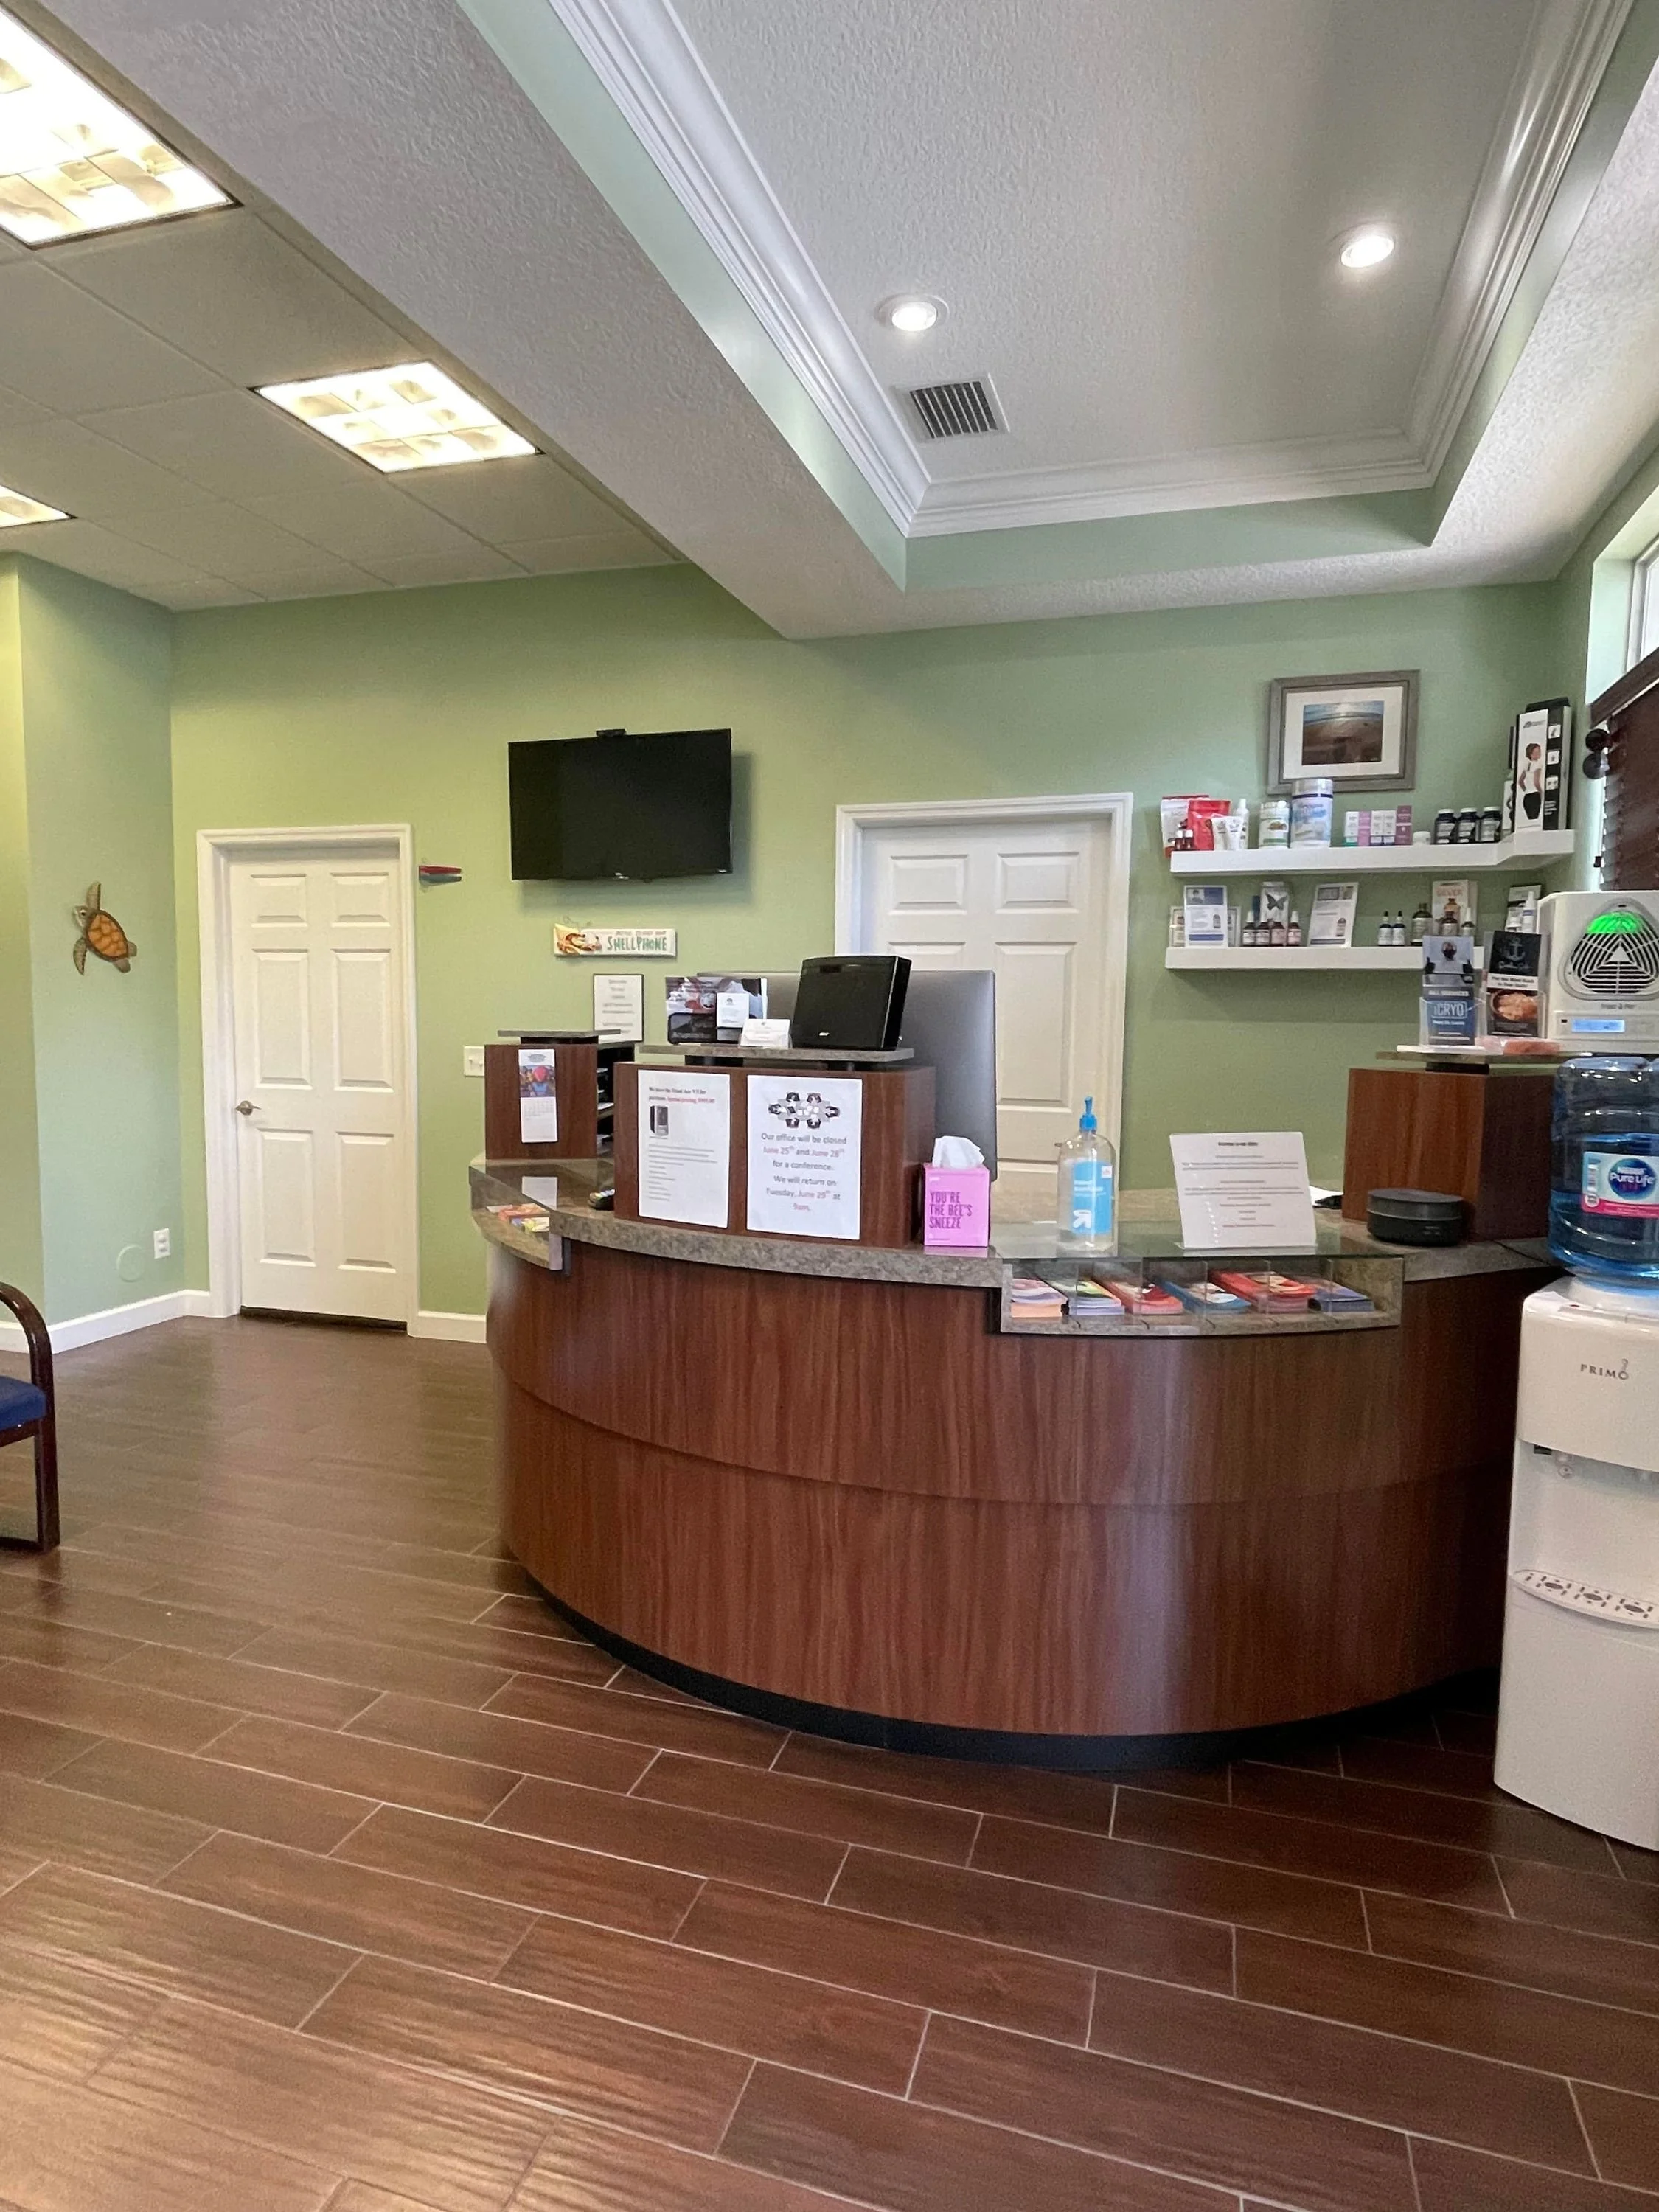 Achieving Wellness Chiropractic - Chiropractor in Port St. Lucie, FL, USA  :: Virtual Office Tour